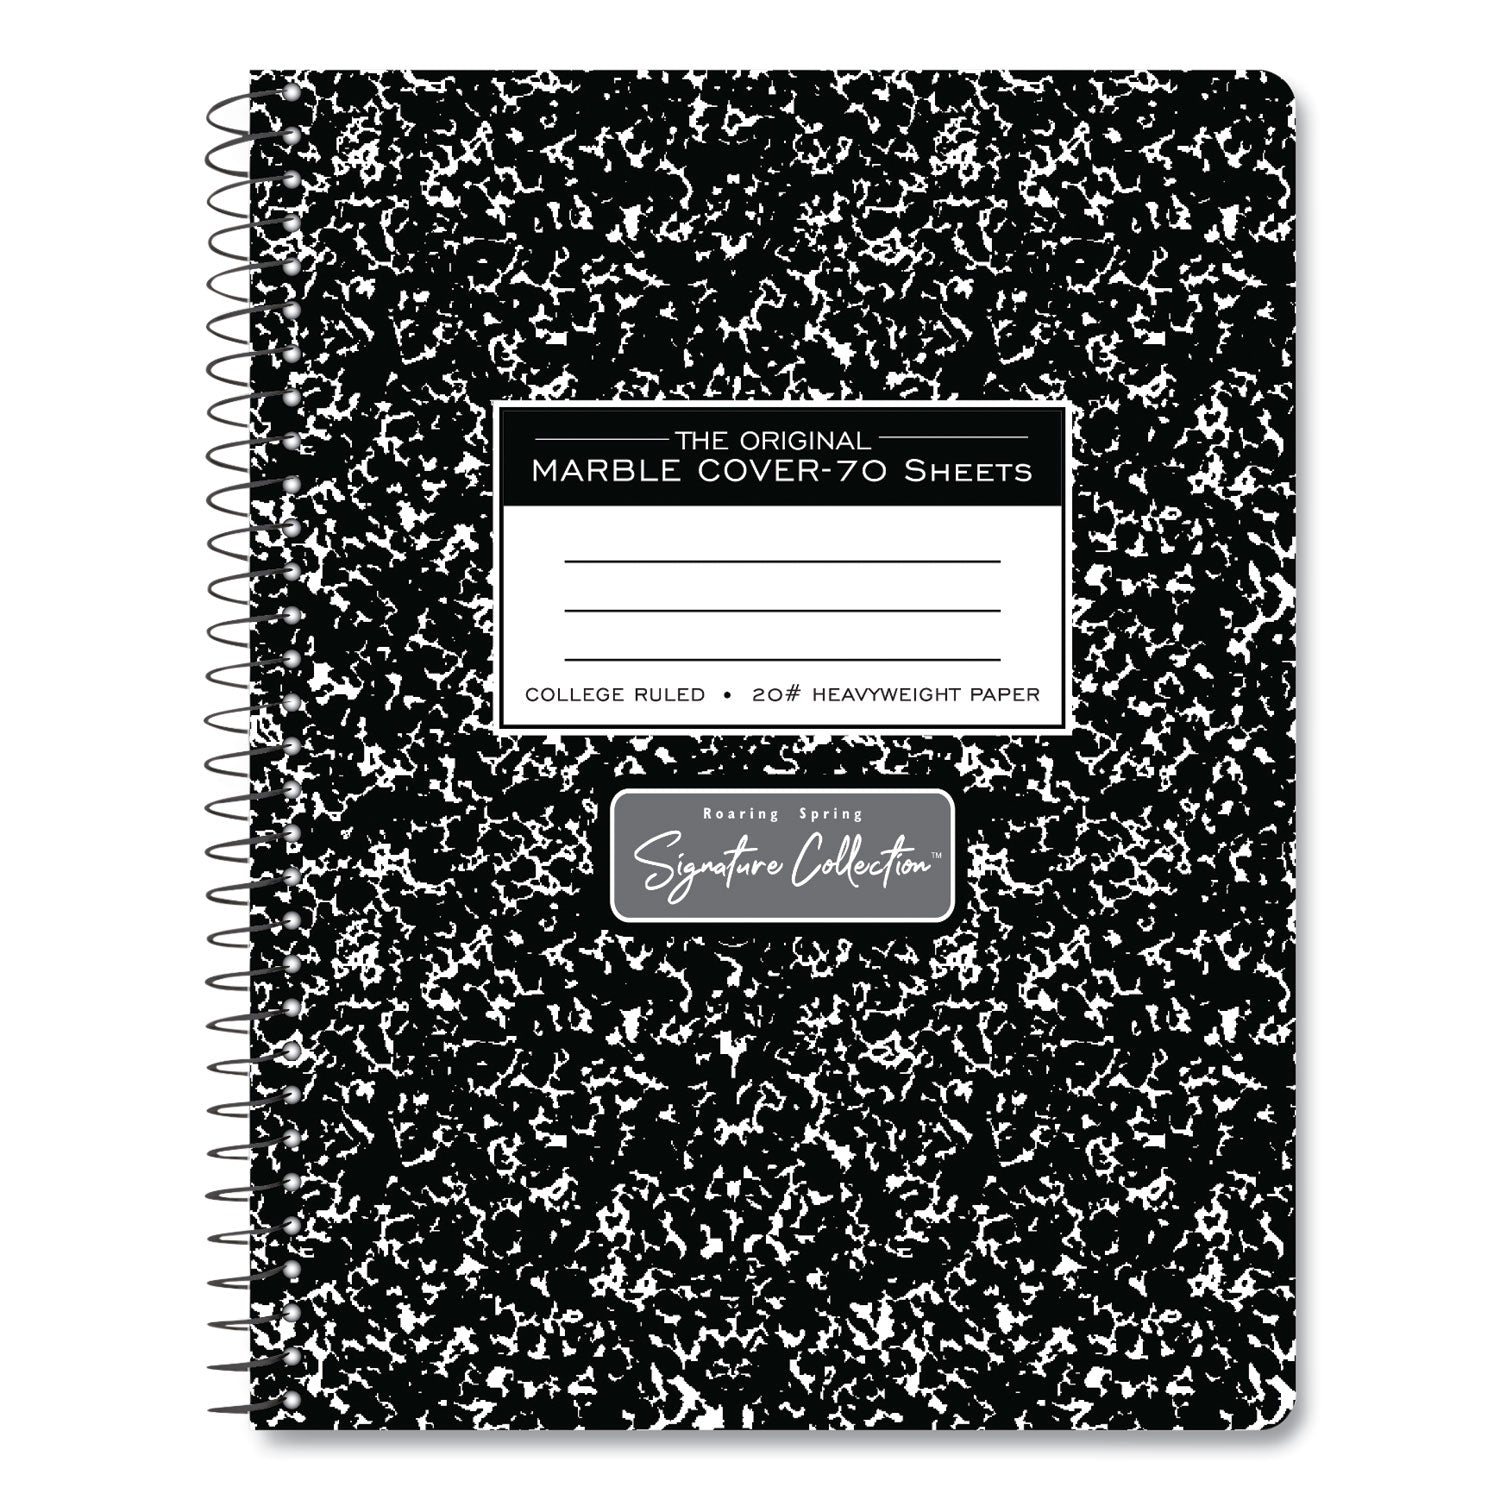 spring-signature-composition-book-med-college-rule-black-marble-cover-70-975-x-75-sheet-24-ct-ships-in-4-6-bus-days_roa10111cs - 7